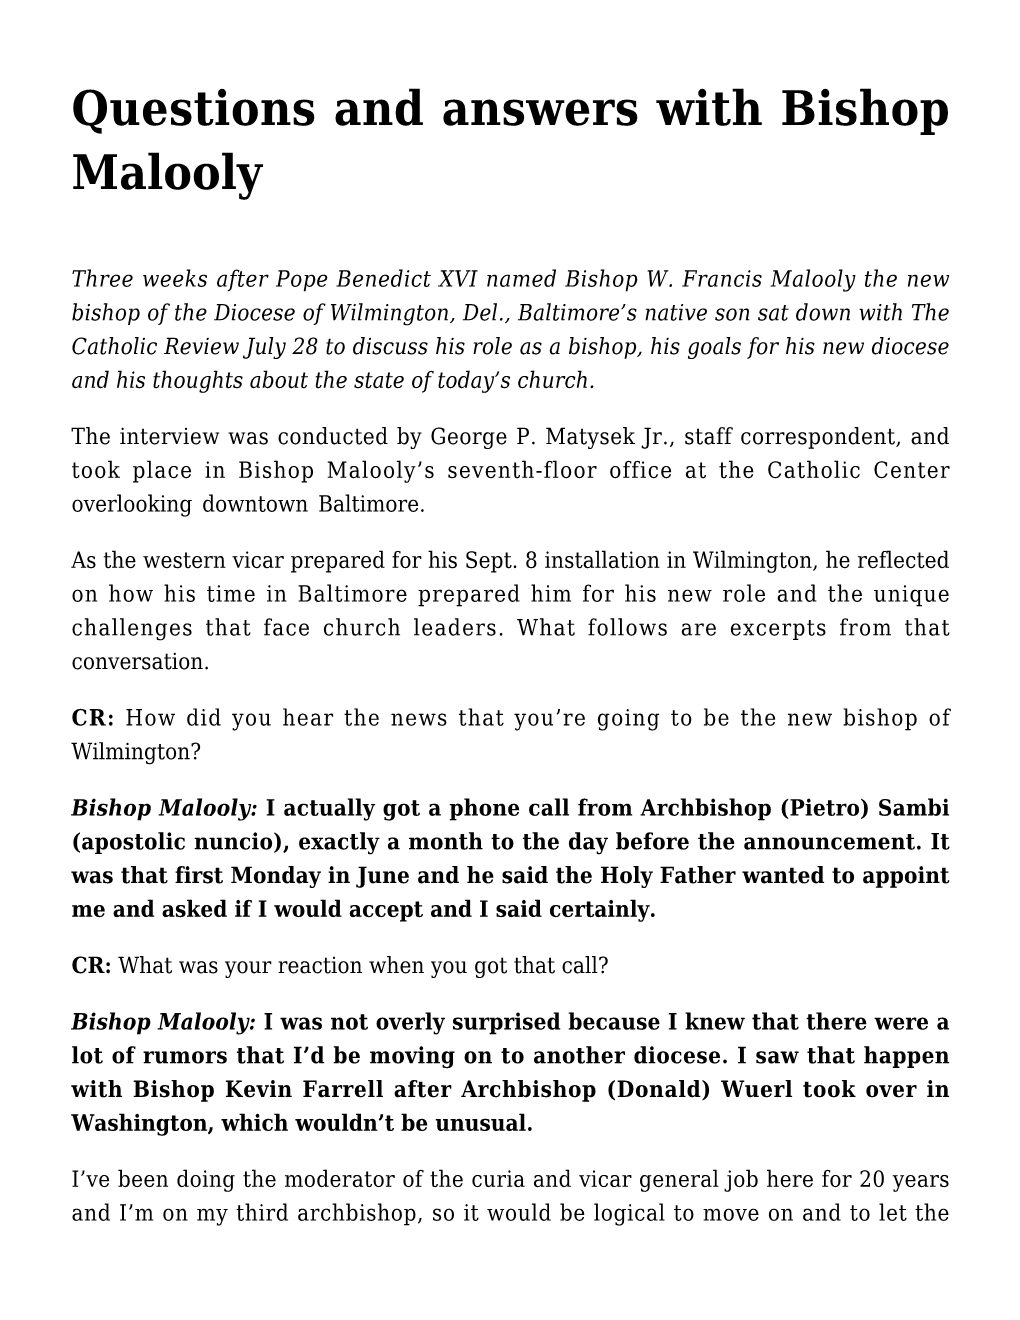 Questions and Answers with Bishop Malooly